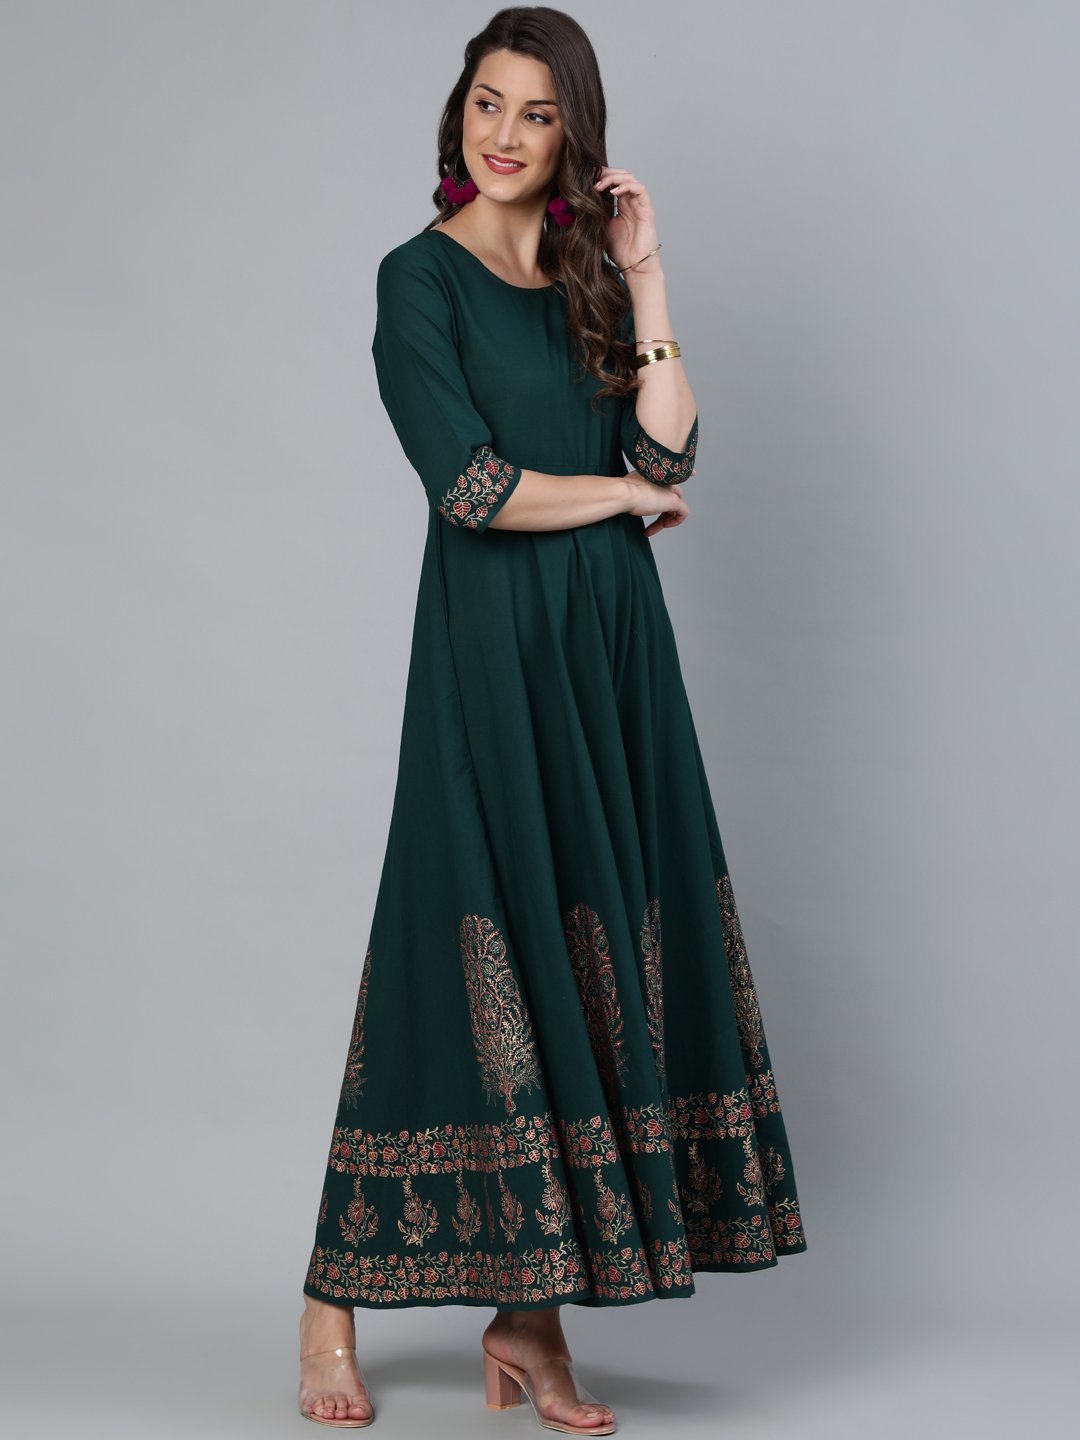 Women's Green & Gold Block Printed Maxi Dress With Three Quarter Sleeves - Nayo Clothing